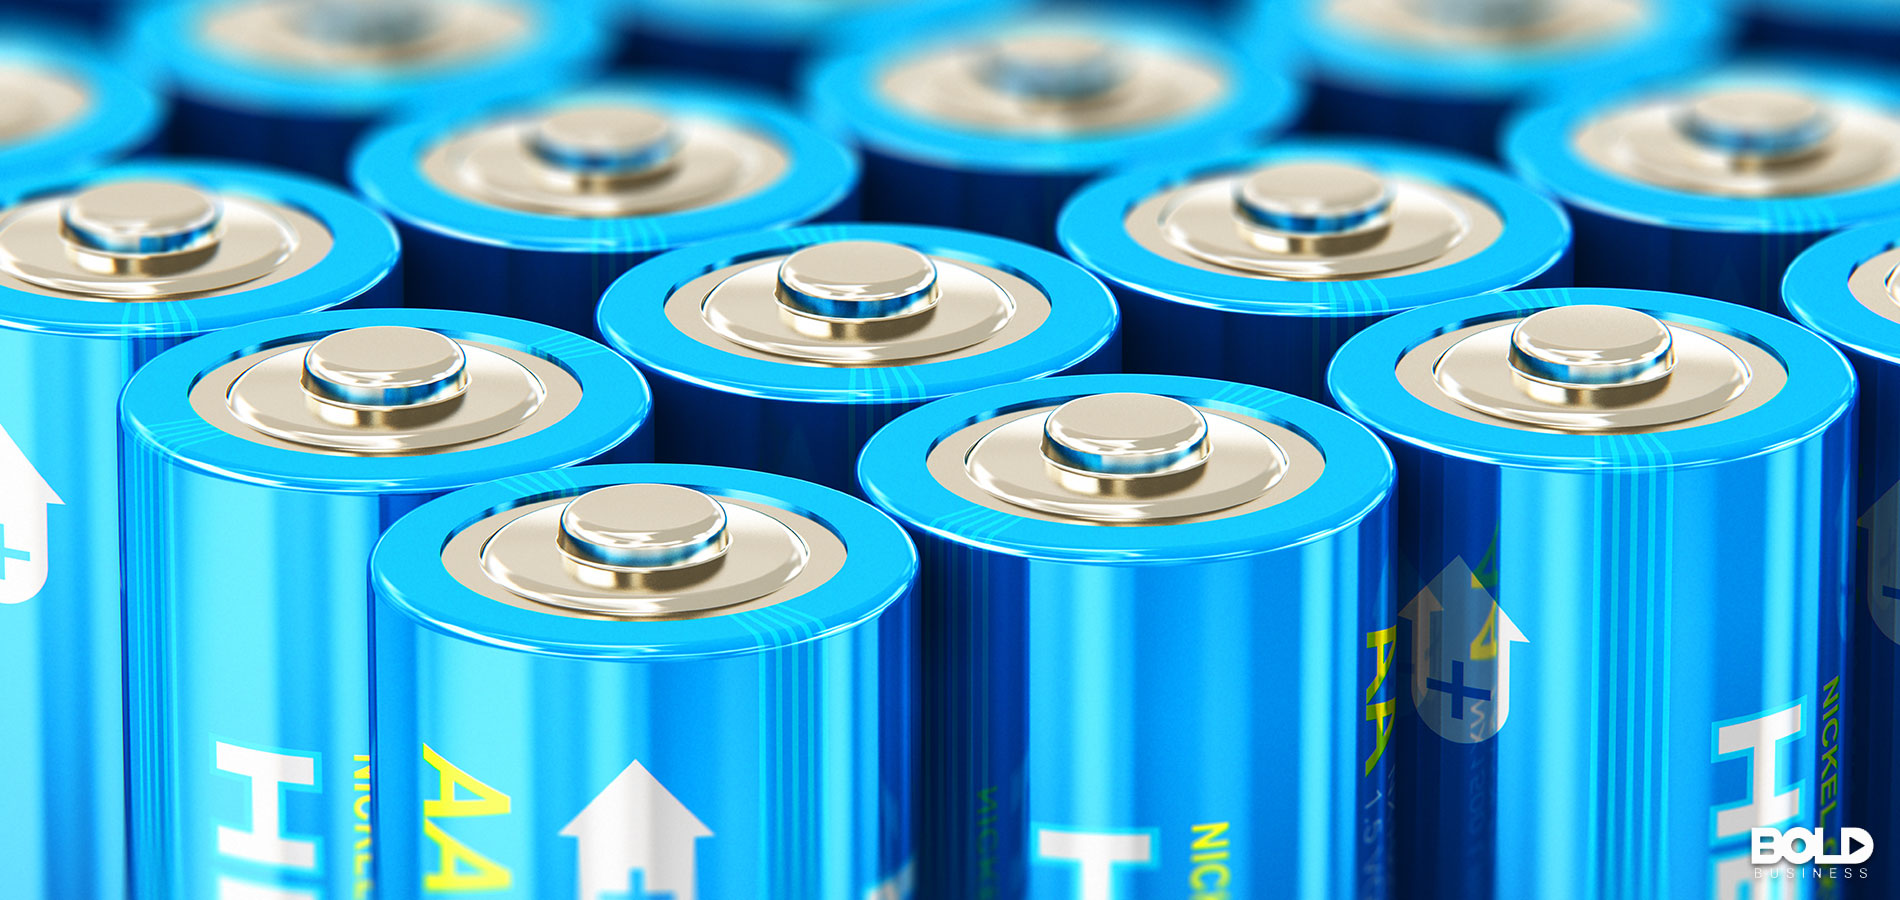 An army of blue batteries ready to charge